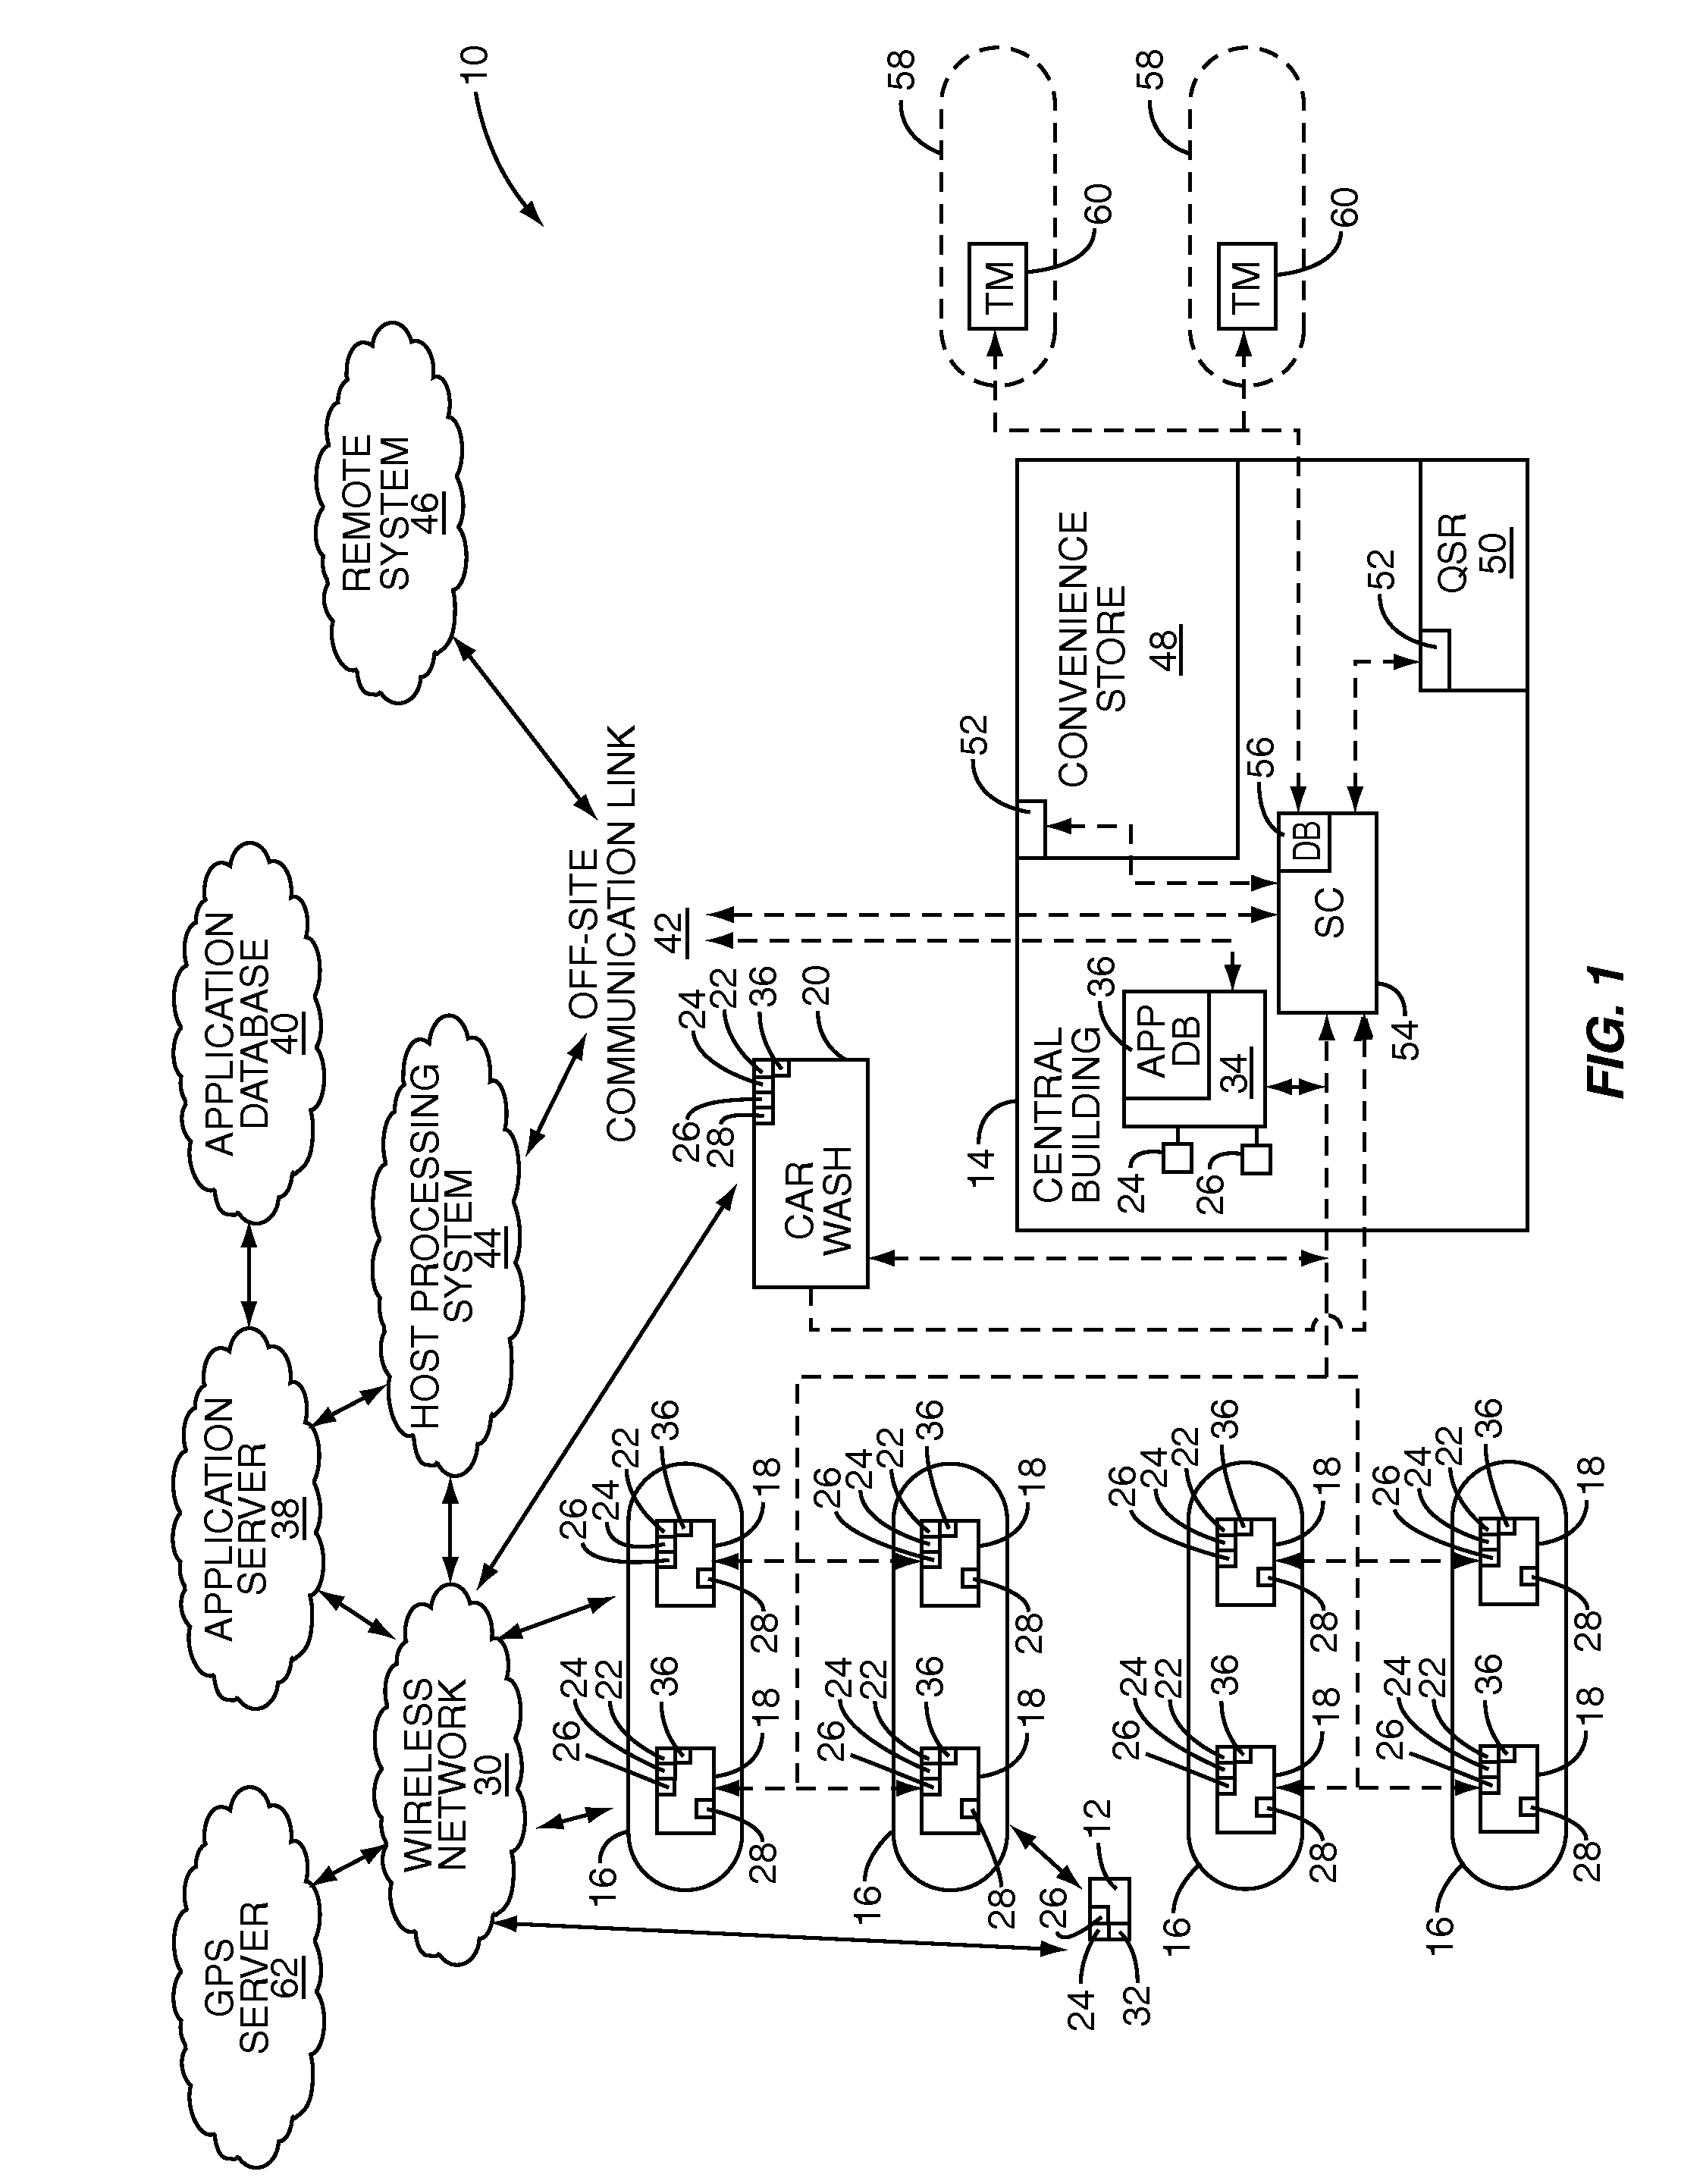 System and method for providing an application-specific user interface on a personal communication device for conducting transactions with retail devices